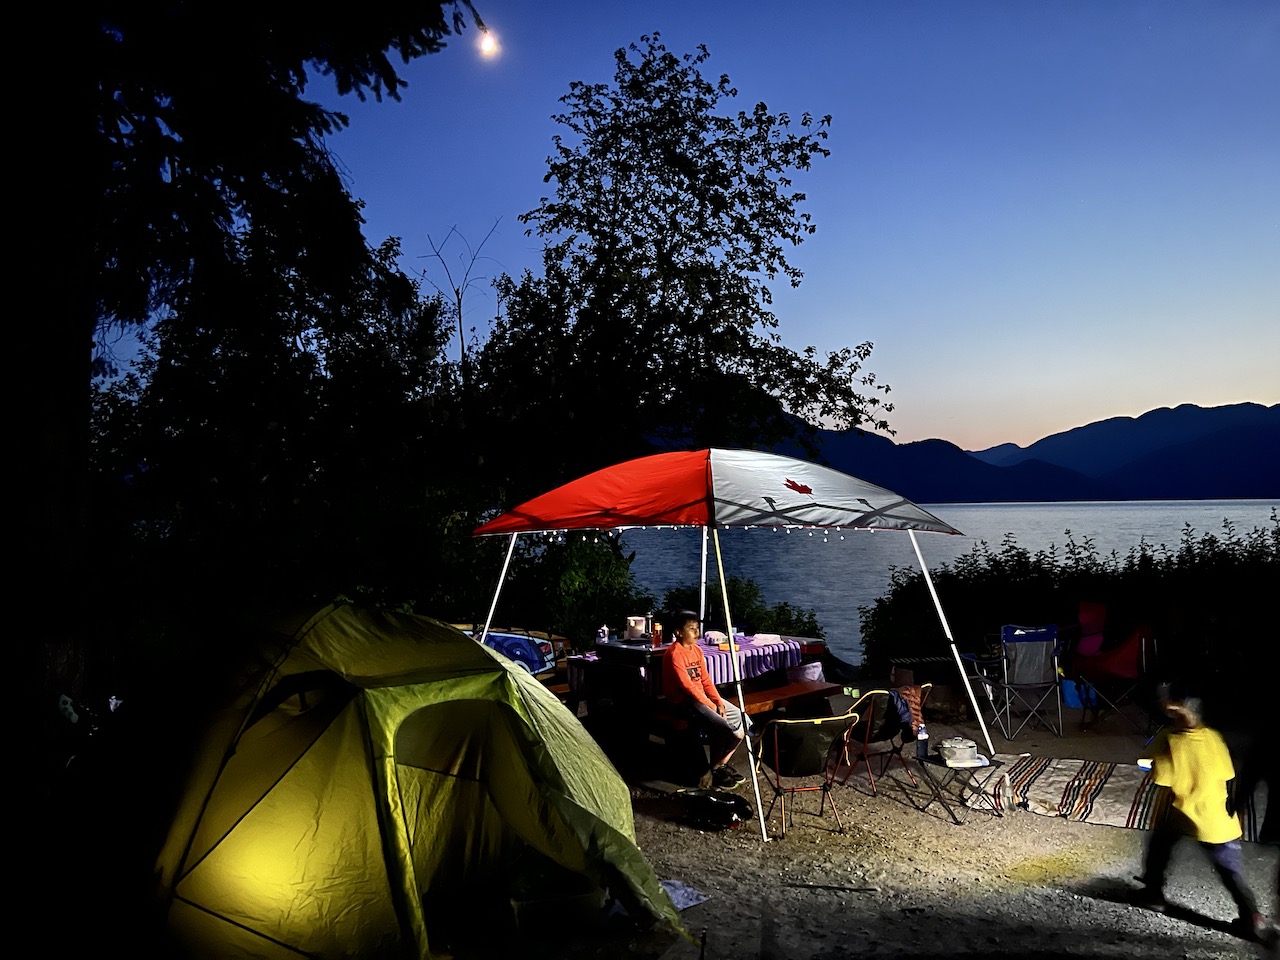 Best Frontcountry Campgrounds near Vancouver for Paddlers